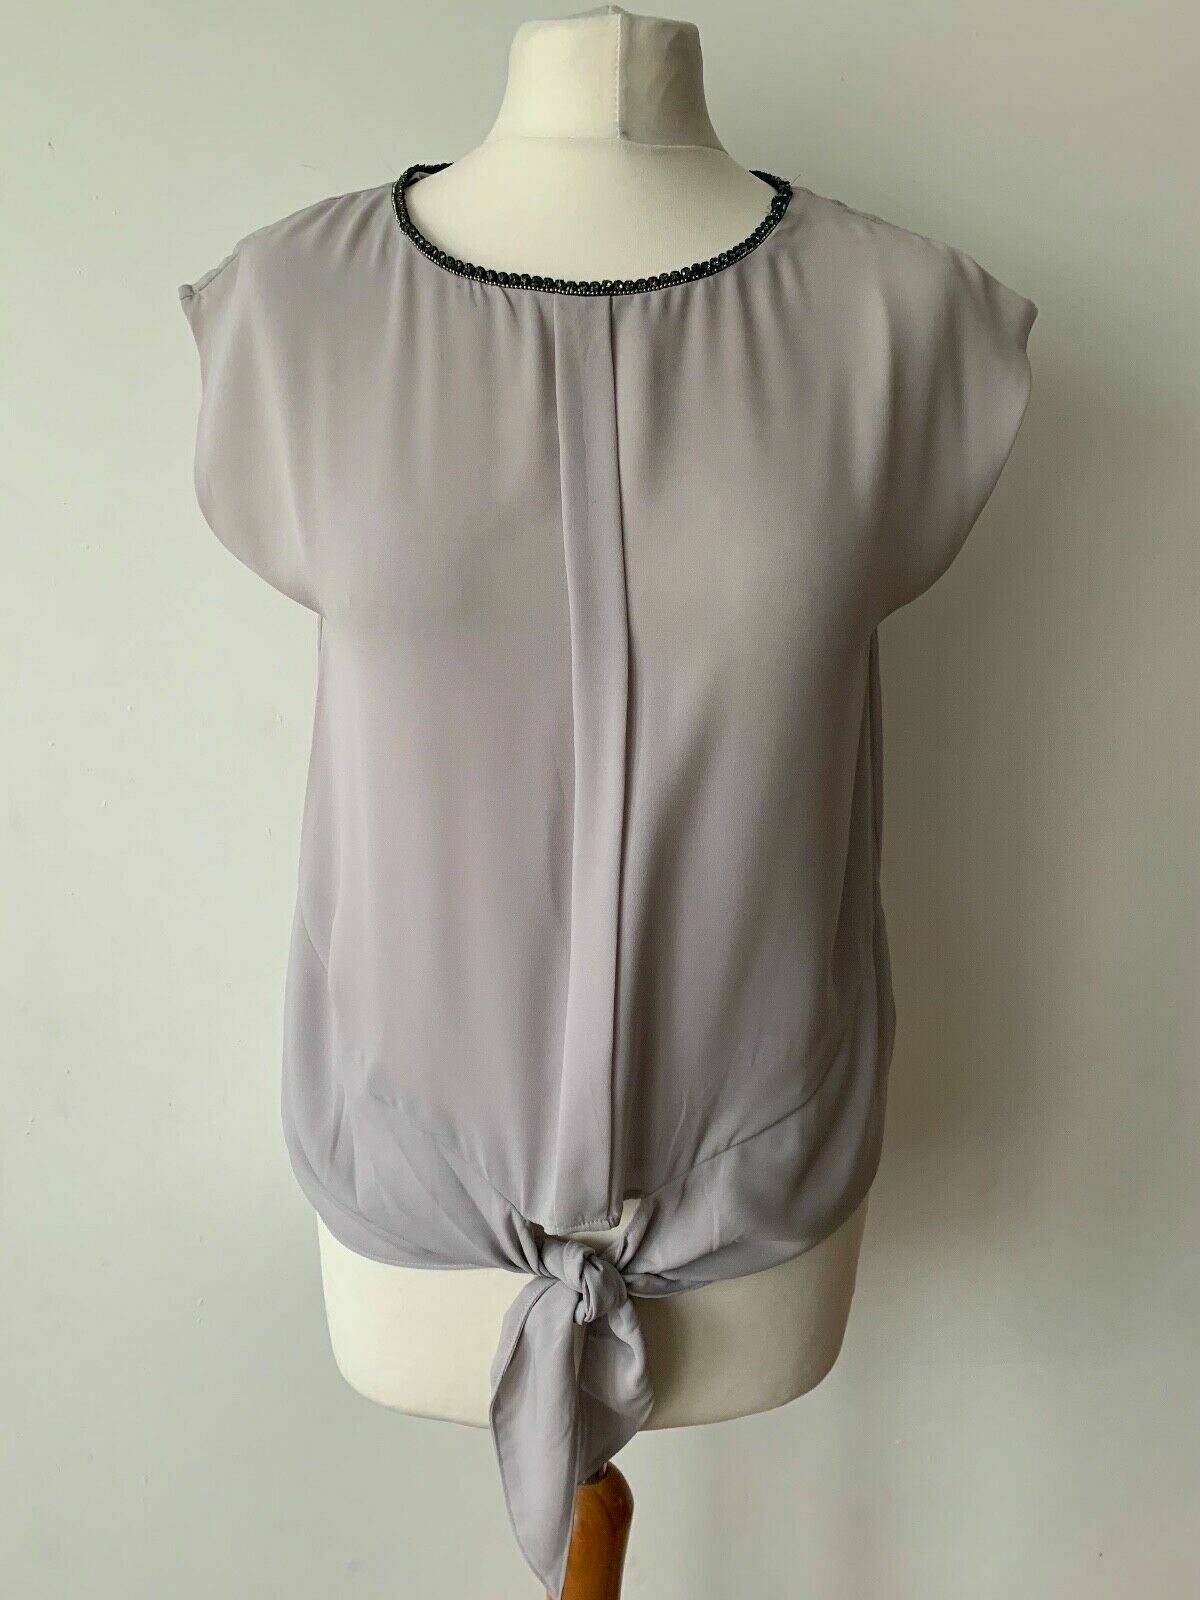 OASIS Grey Sleeveless Blouse Bejewelled Neckline Tie Front Size 8